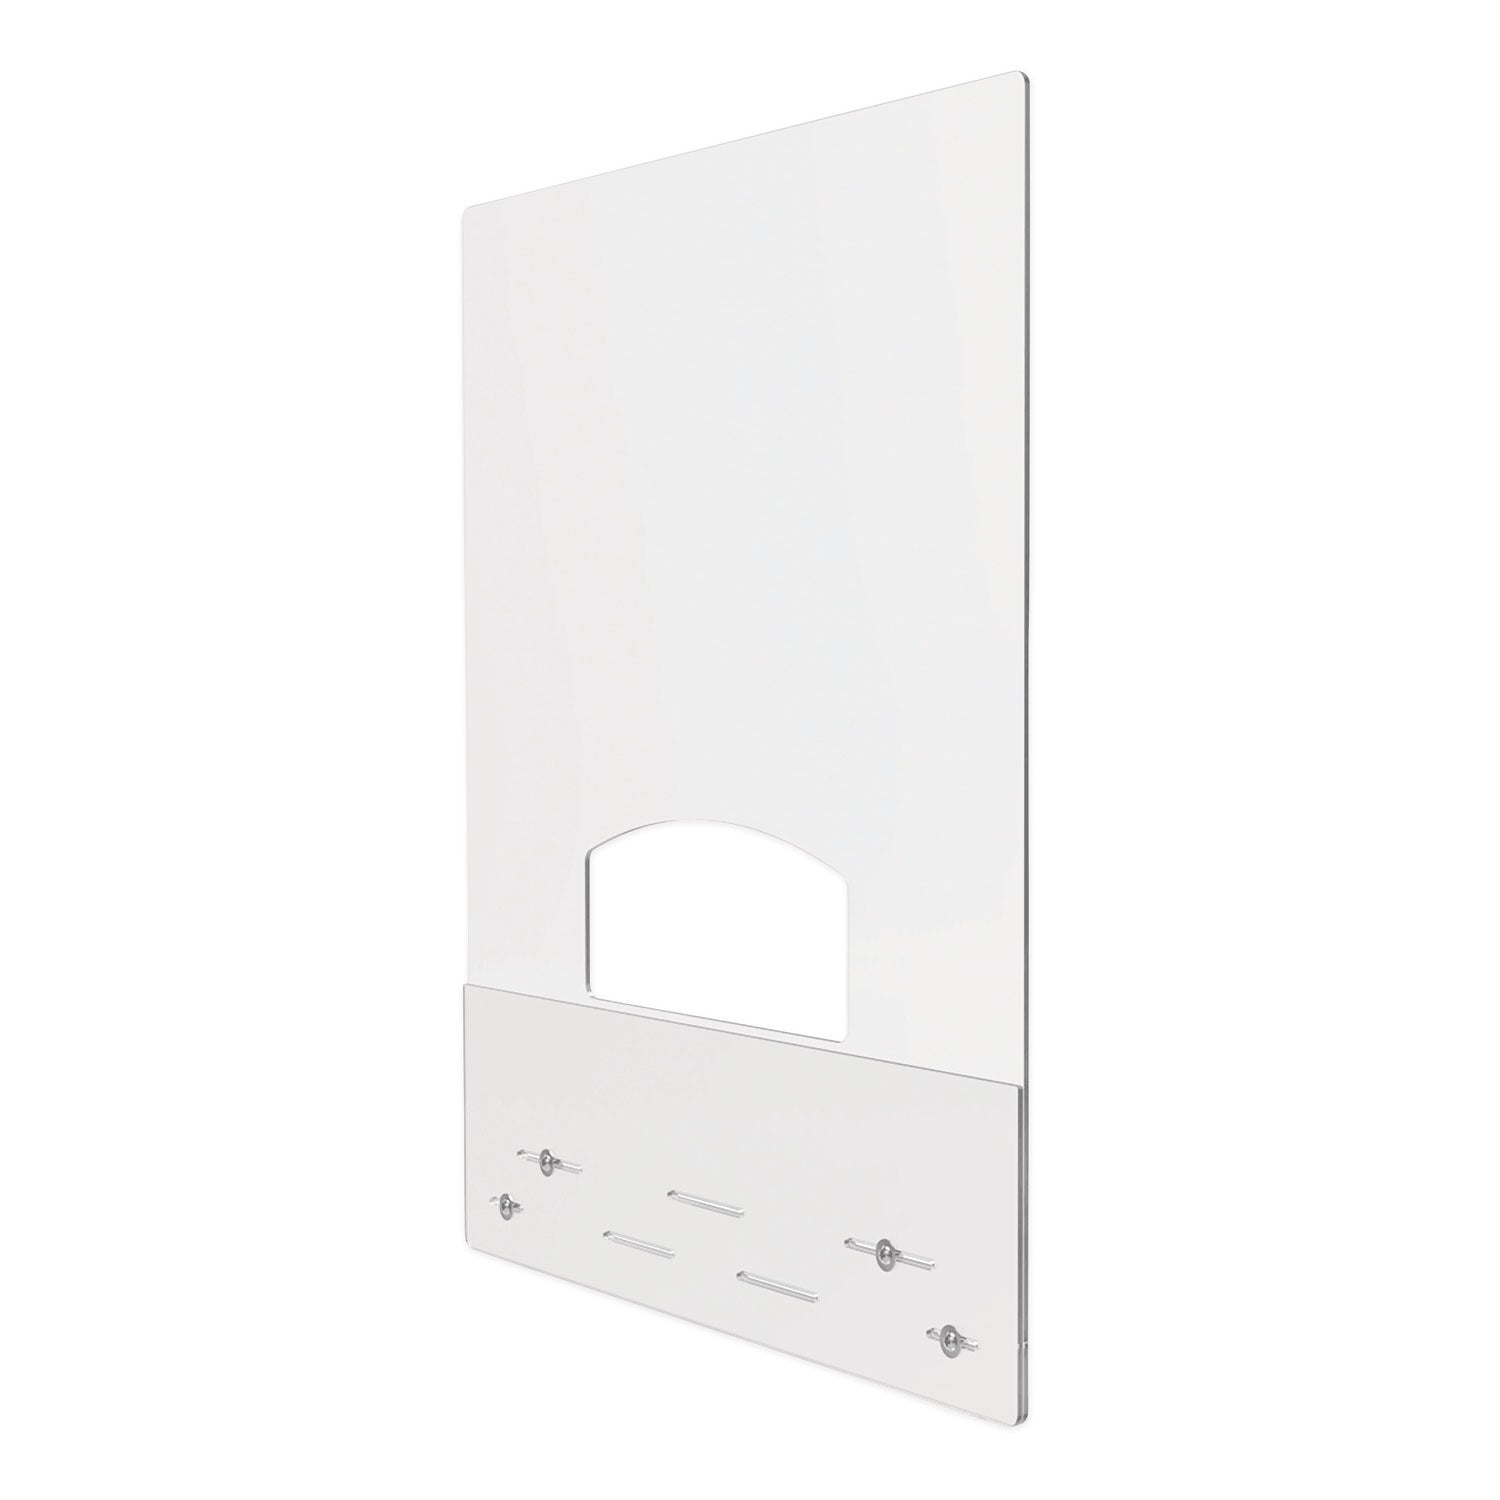 mounting-safety-barrier-with-pass-thru-315-x-38-acrylic-clear-2-carton_defpbcma3138p - 1